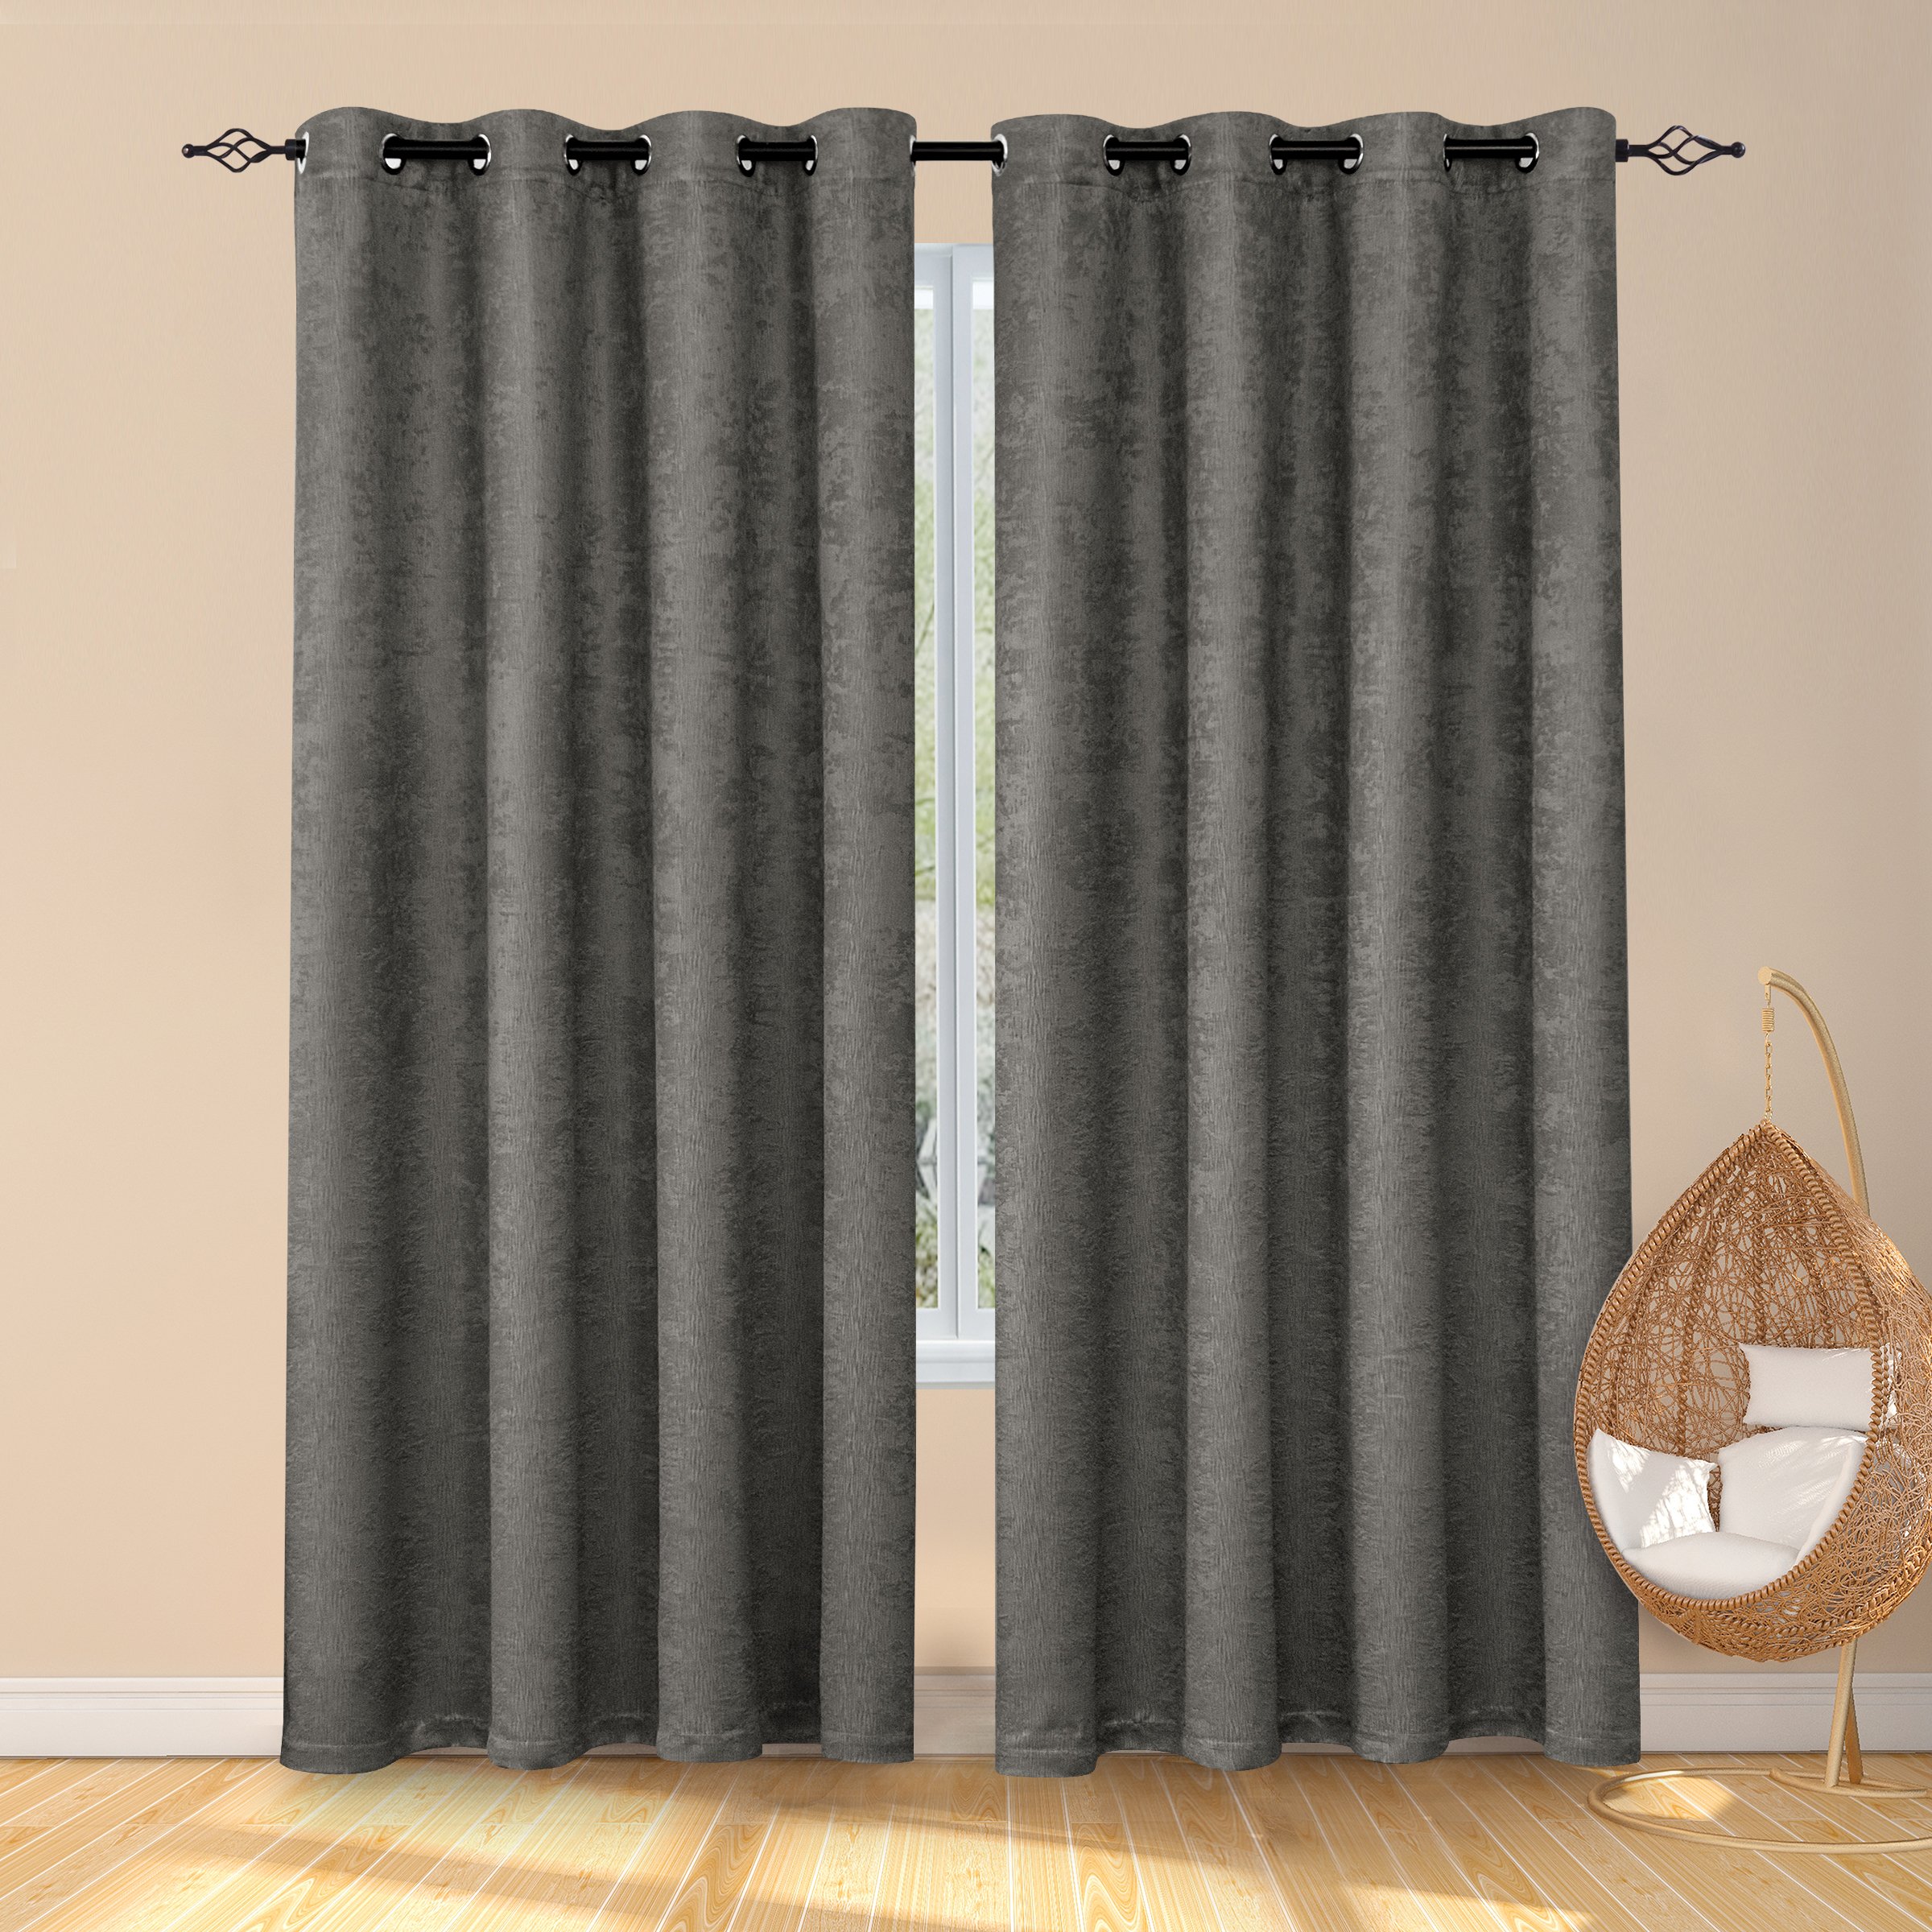 Subrtex Thermal Insulated Grommet Blackout Curtains for Bedroom, Set of 2 Panels, 53"×96", Dark Grey - image 1 of 5